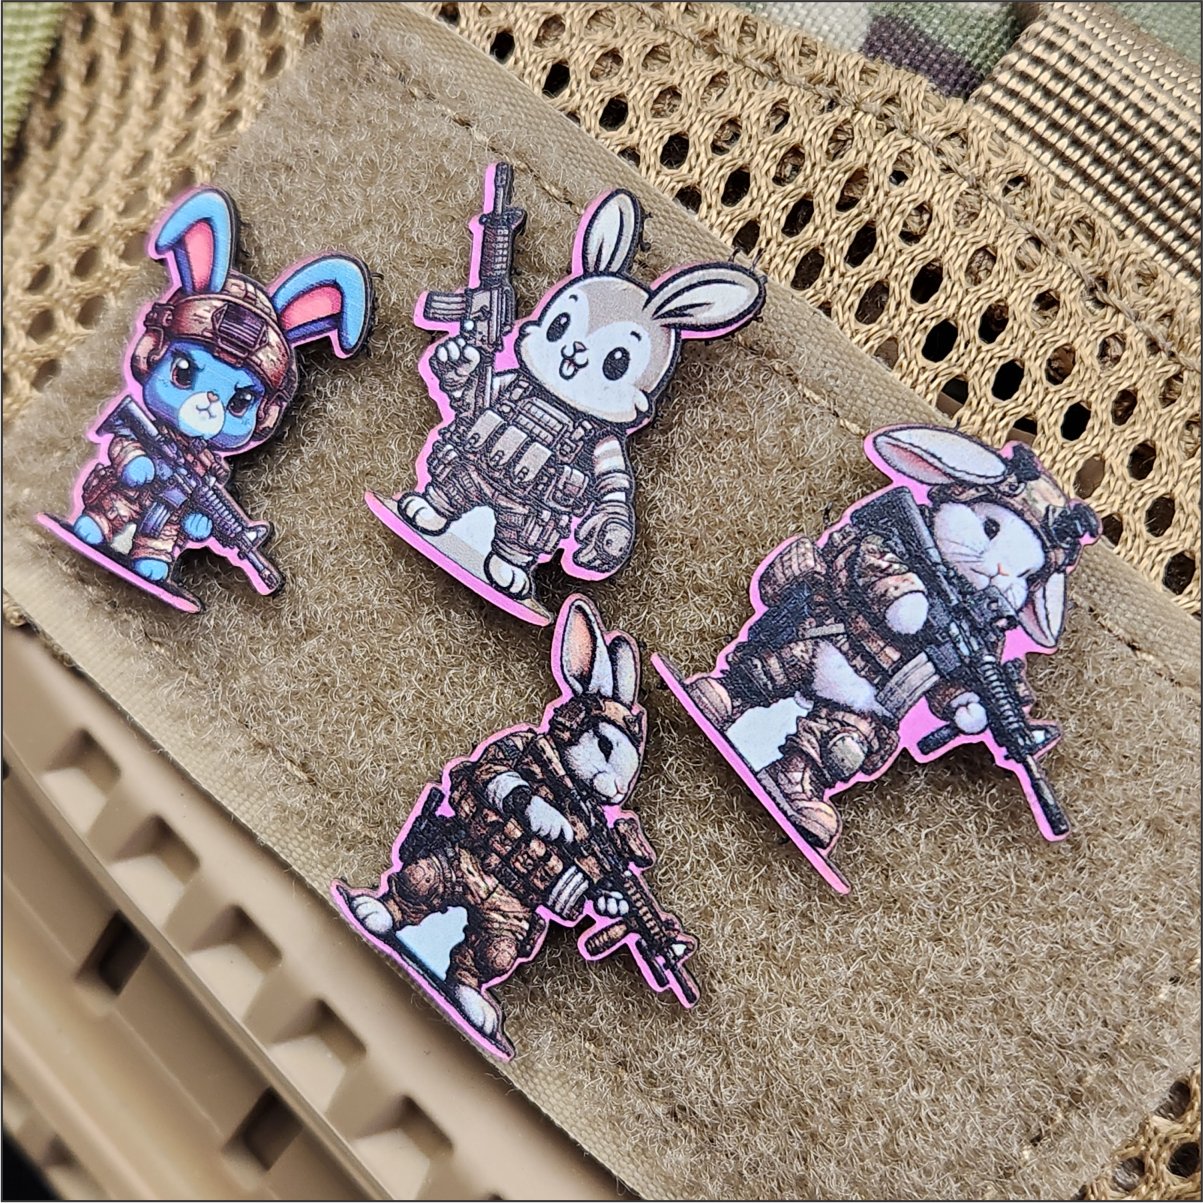 Tactical Easter Bunny Mini Morale Battle Bunnies Pack 1 - 4 piece tine patch pack